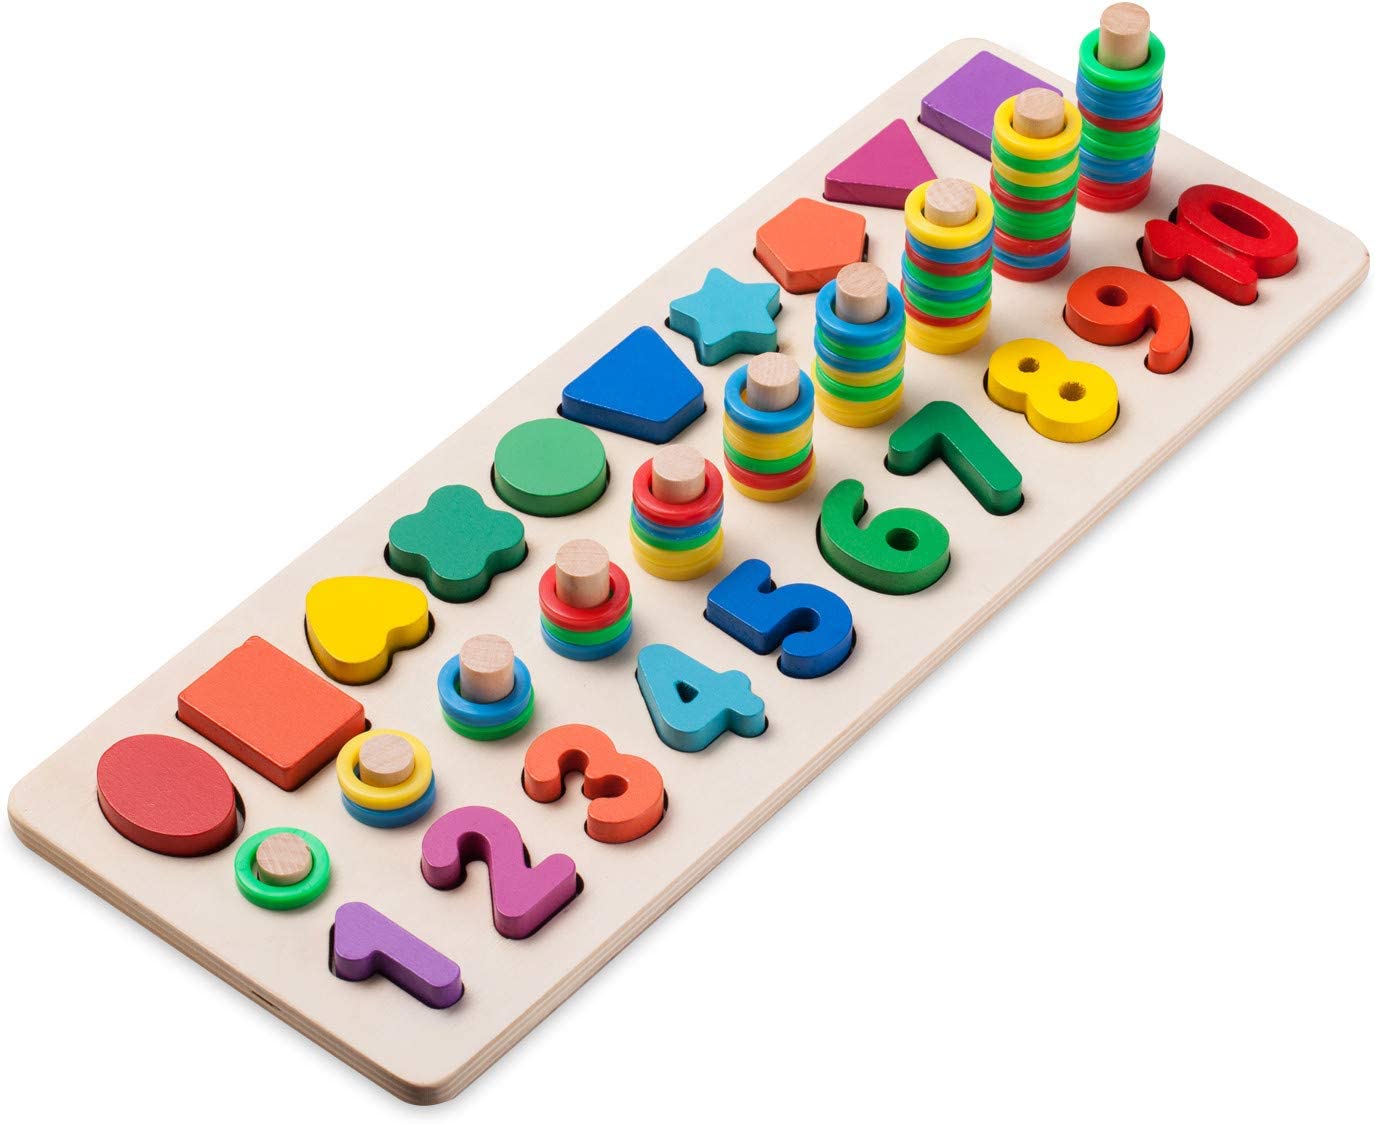 Wood Blocks Puzzle Board Set for Toddler Preschool Kids, Learning & Educational Toys for Number Counting, Colours Stacking, Shape Sorting, Early Education Toy